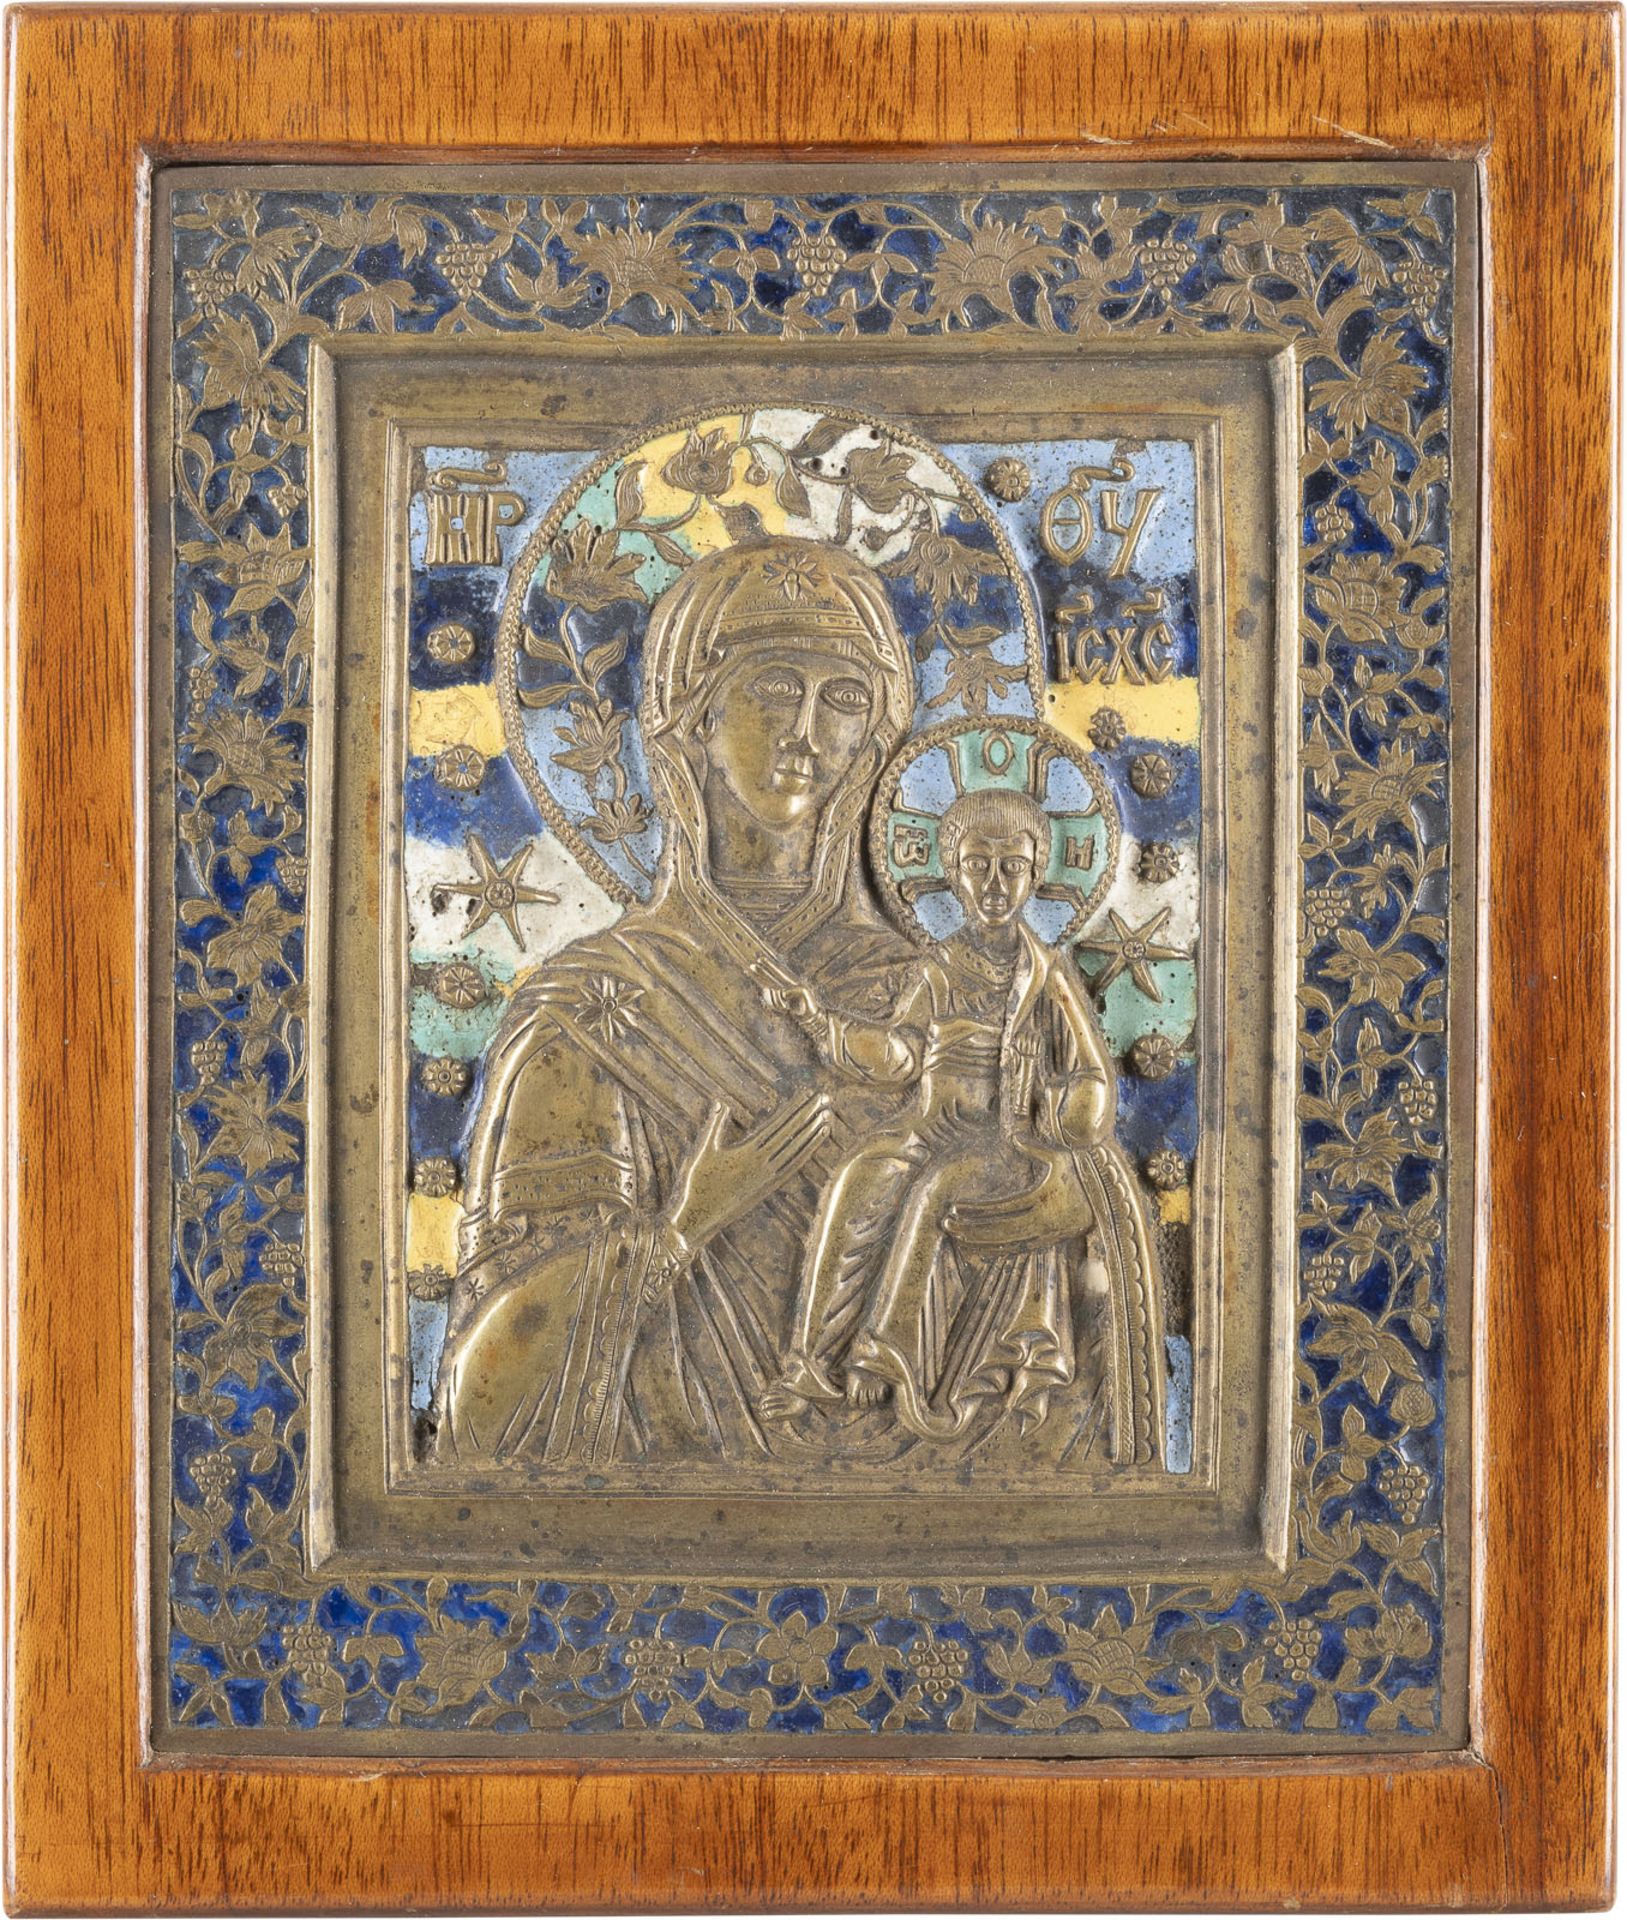 A LARGE BRASS AND ENAMEL ICON SHOWING THE SMOLENSKAYA MOTHER OF GOD